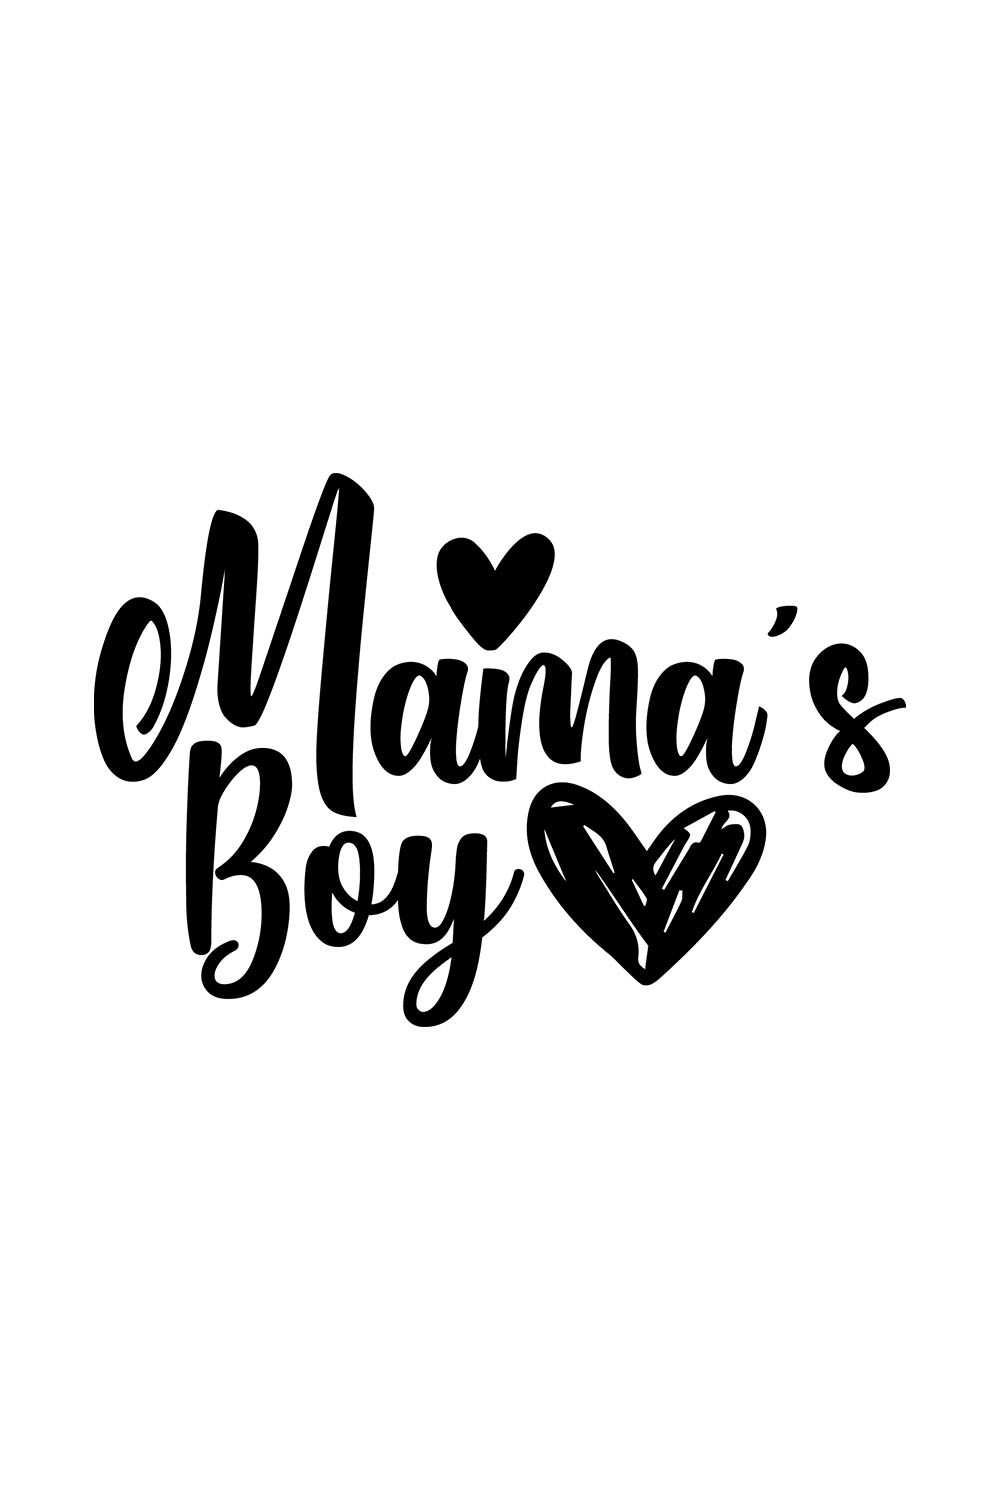 Image with adorable black lettering for Mamas Boy prints.